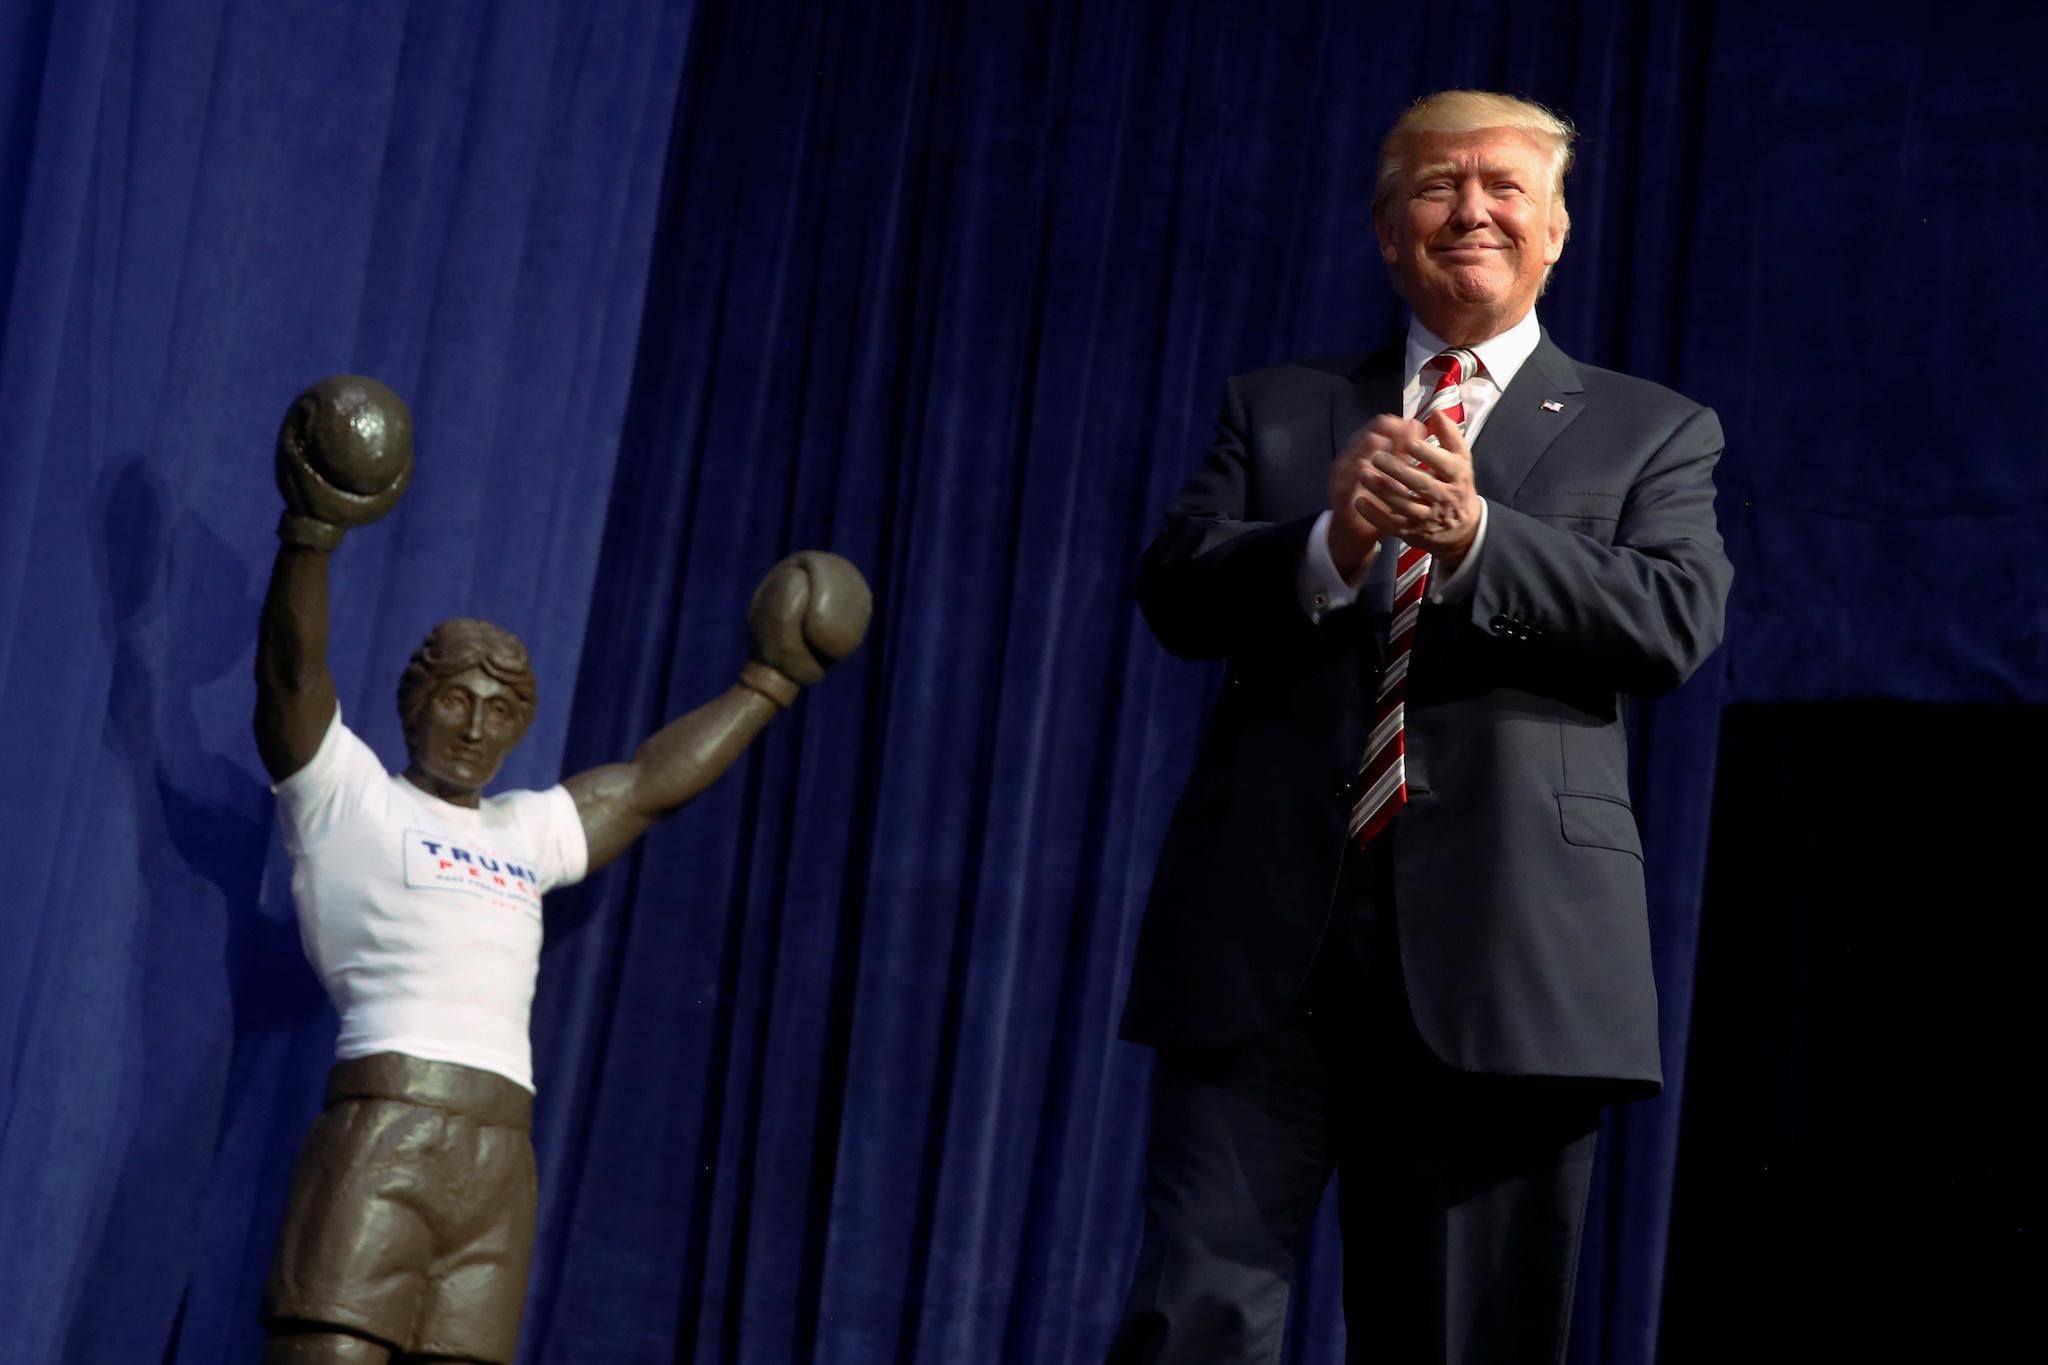 A statue of the movie boxer Rocky stands near the stage entrance as Republican presidential nominee Donald Trump holds a rally with supporters in Aston, Pennsylvania